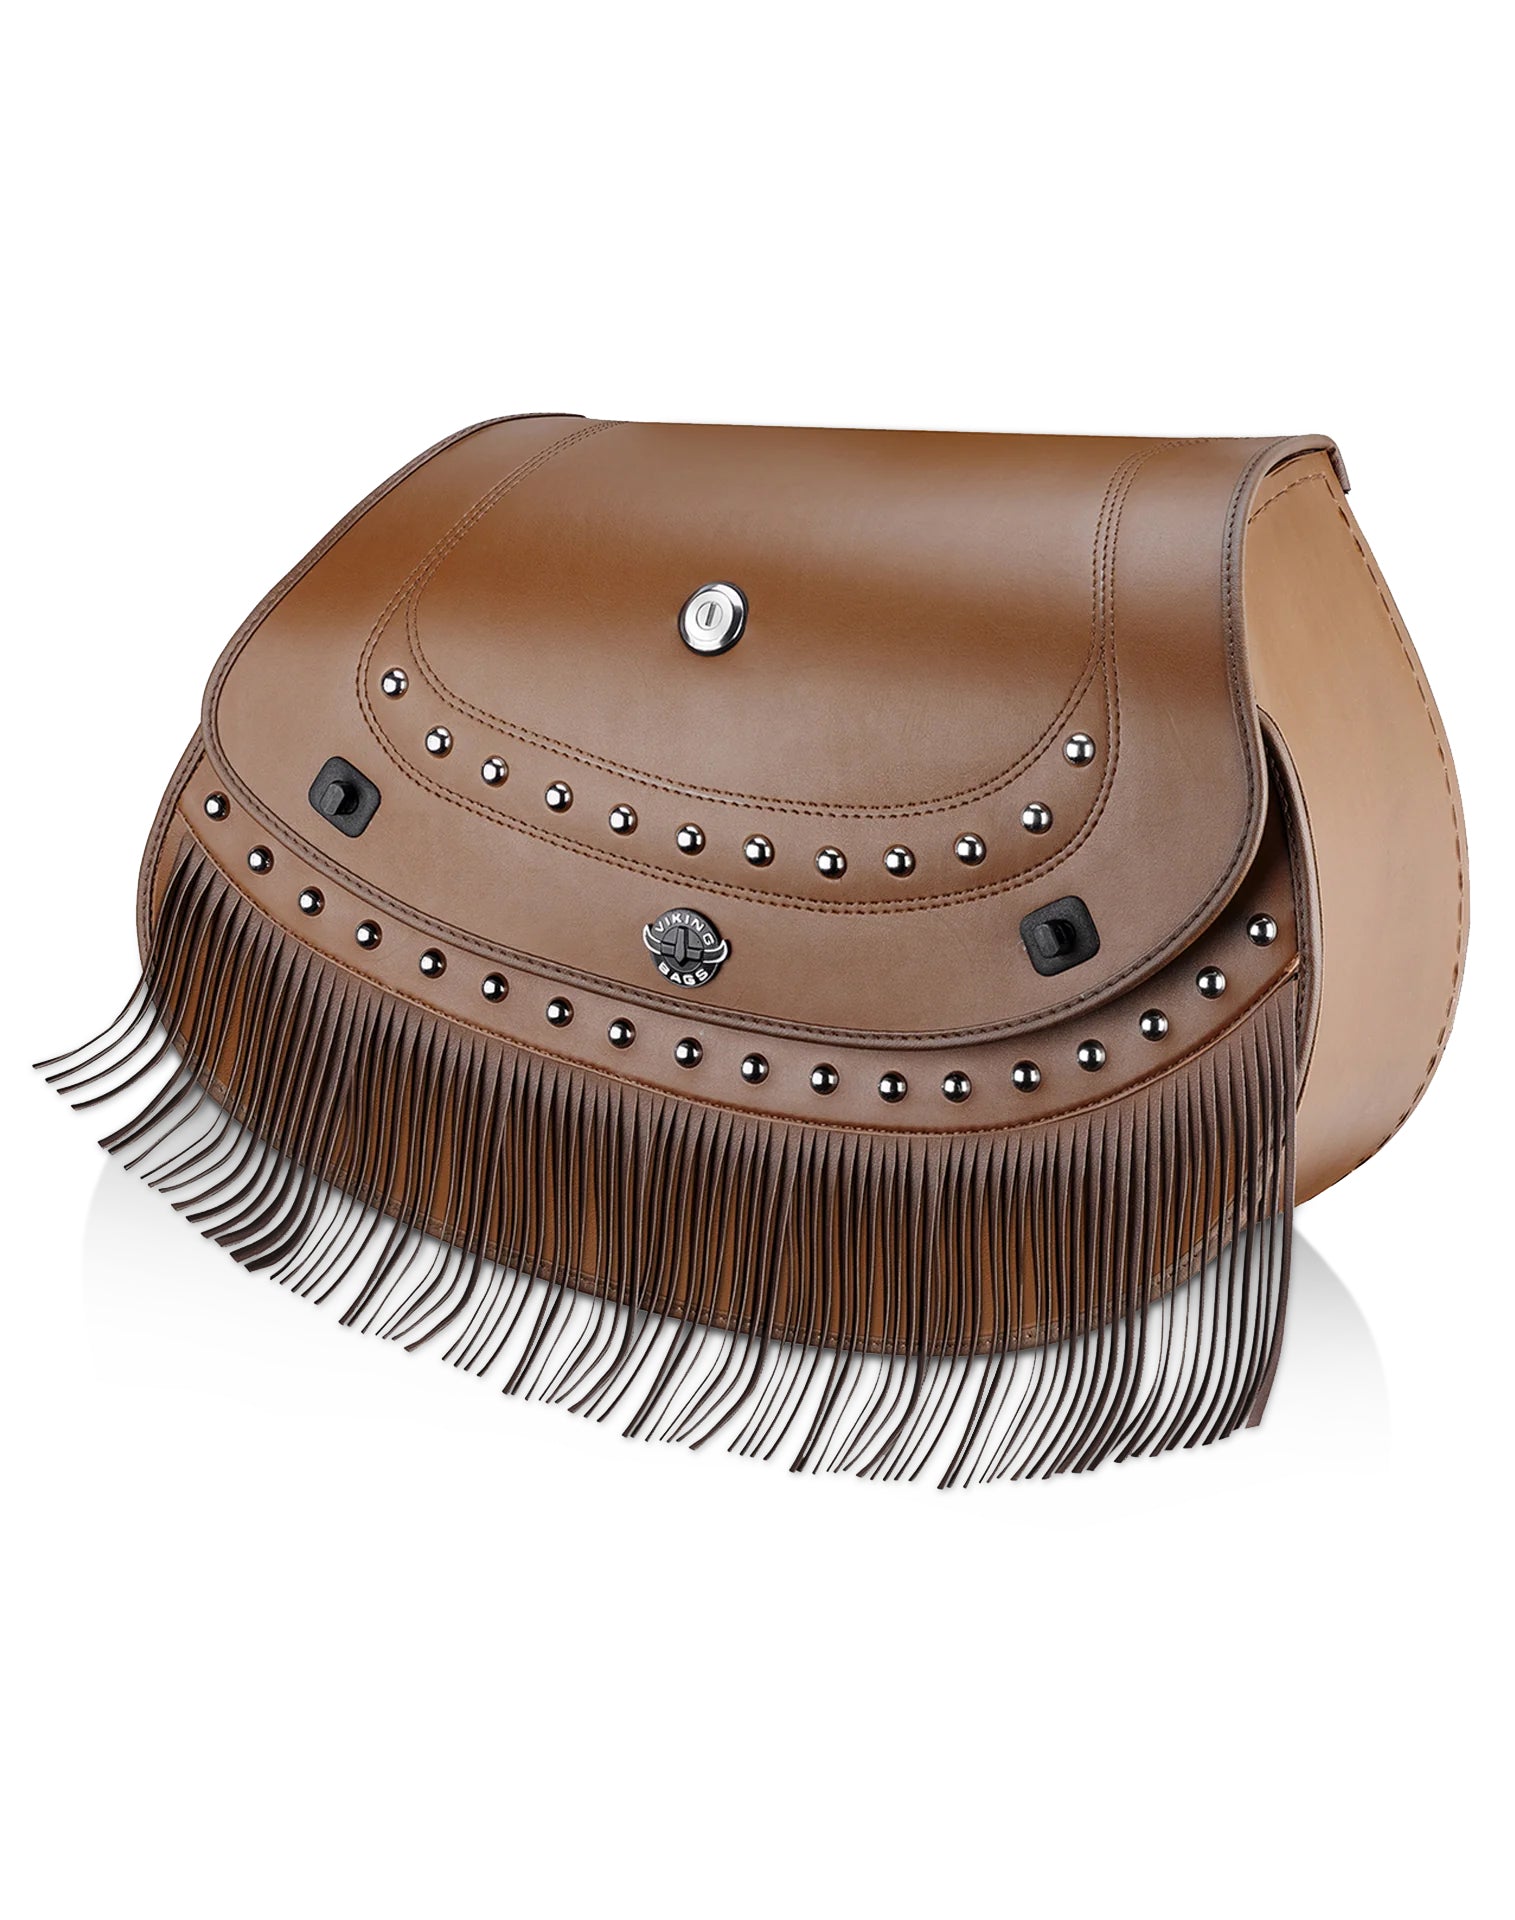 Viking Mohawk Brown Extra Large Indian Chief Darkhorse Specific Leather Motorcycle Saddlebags Main View